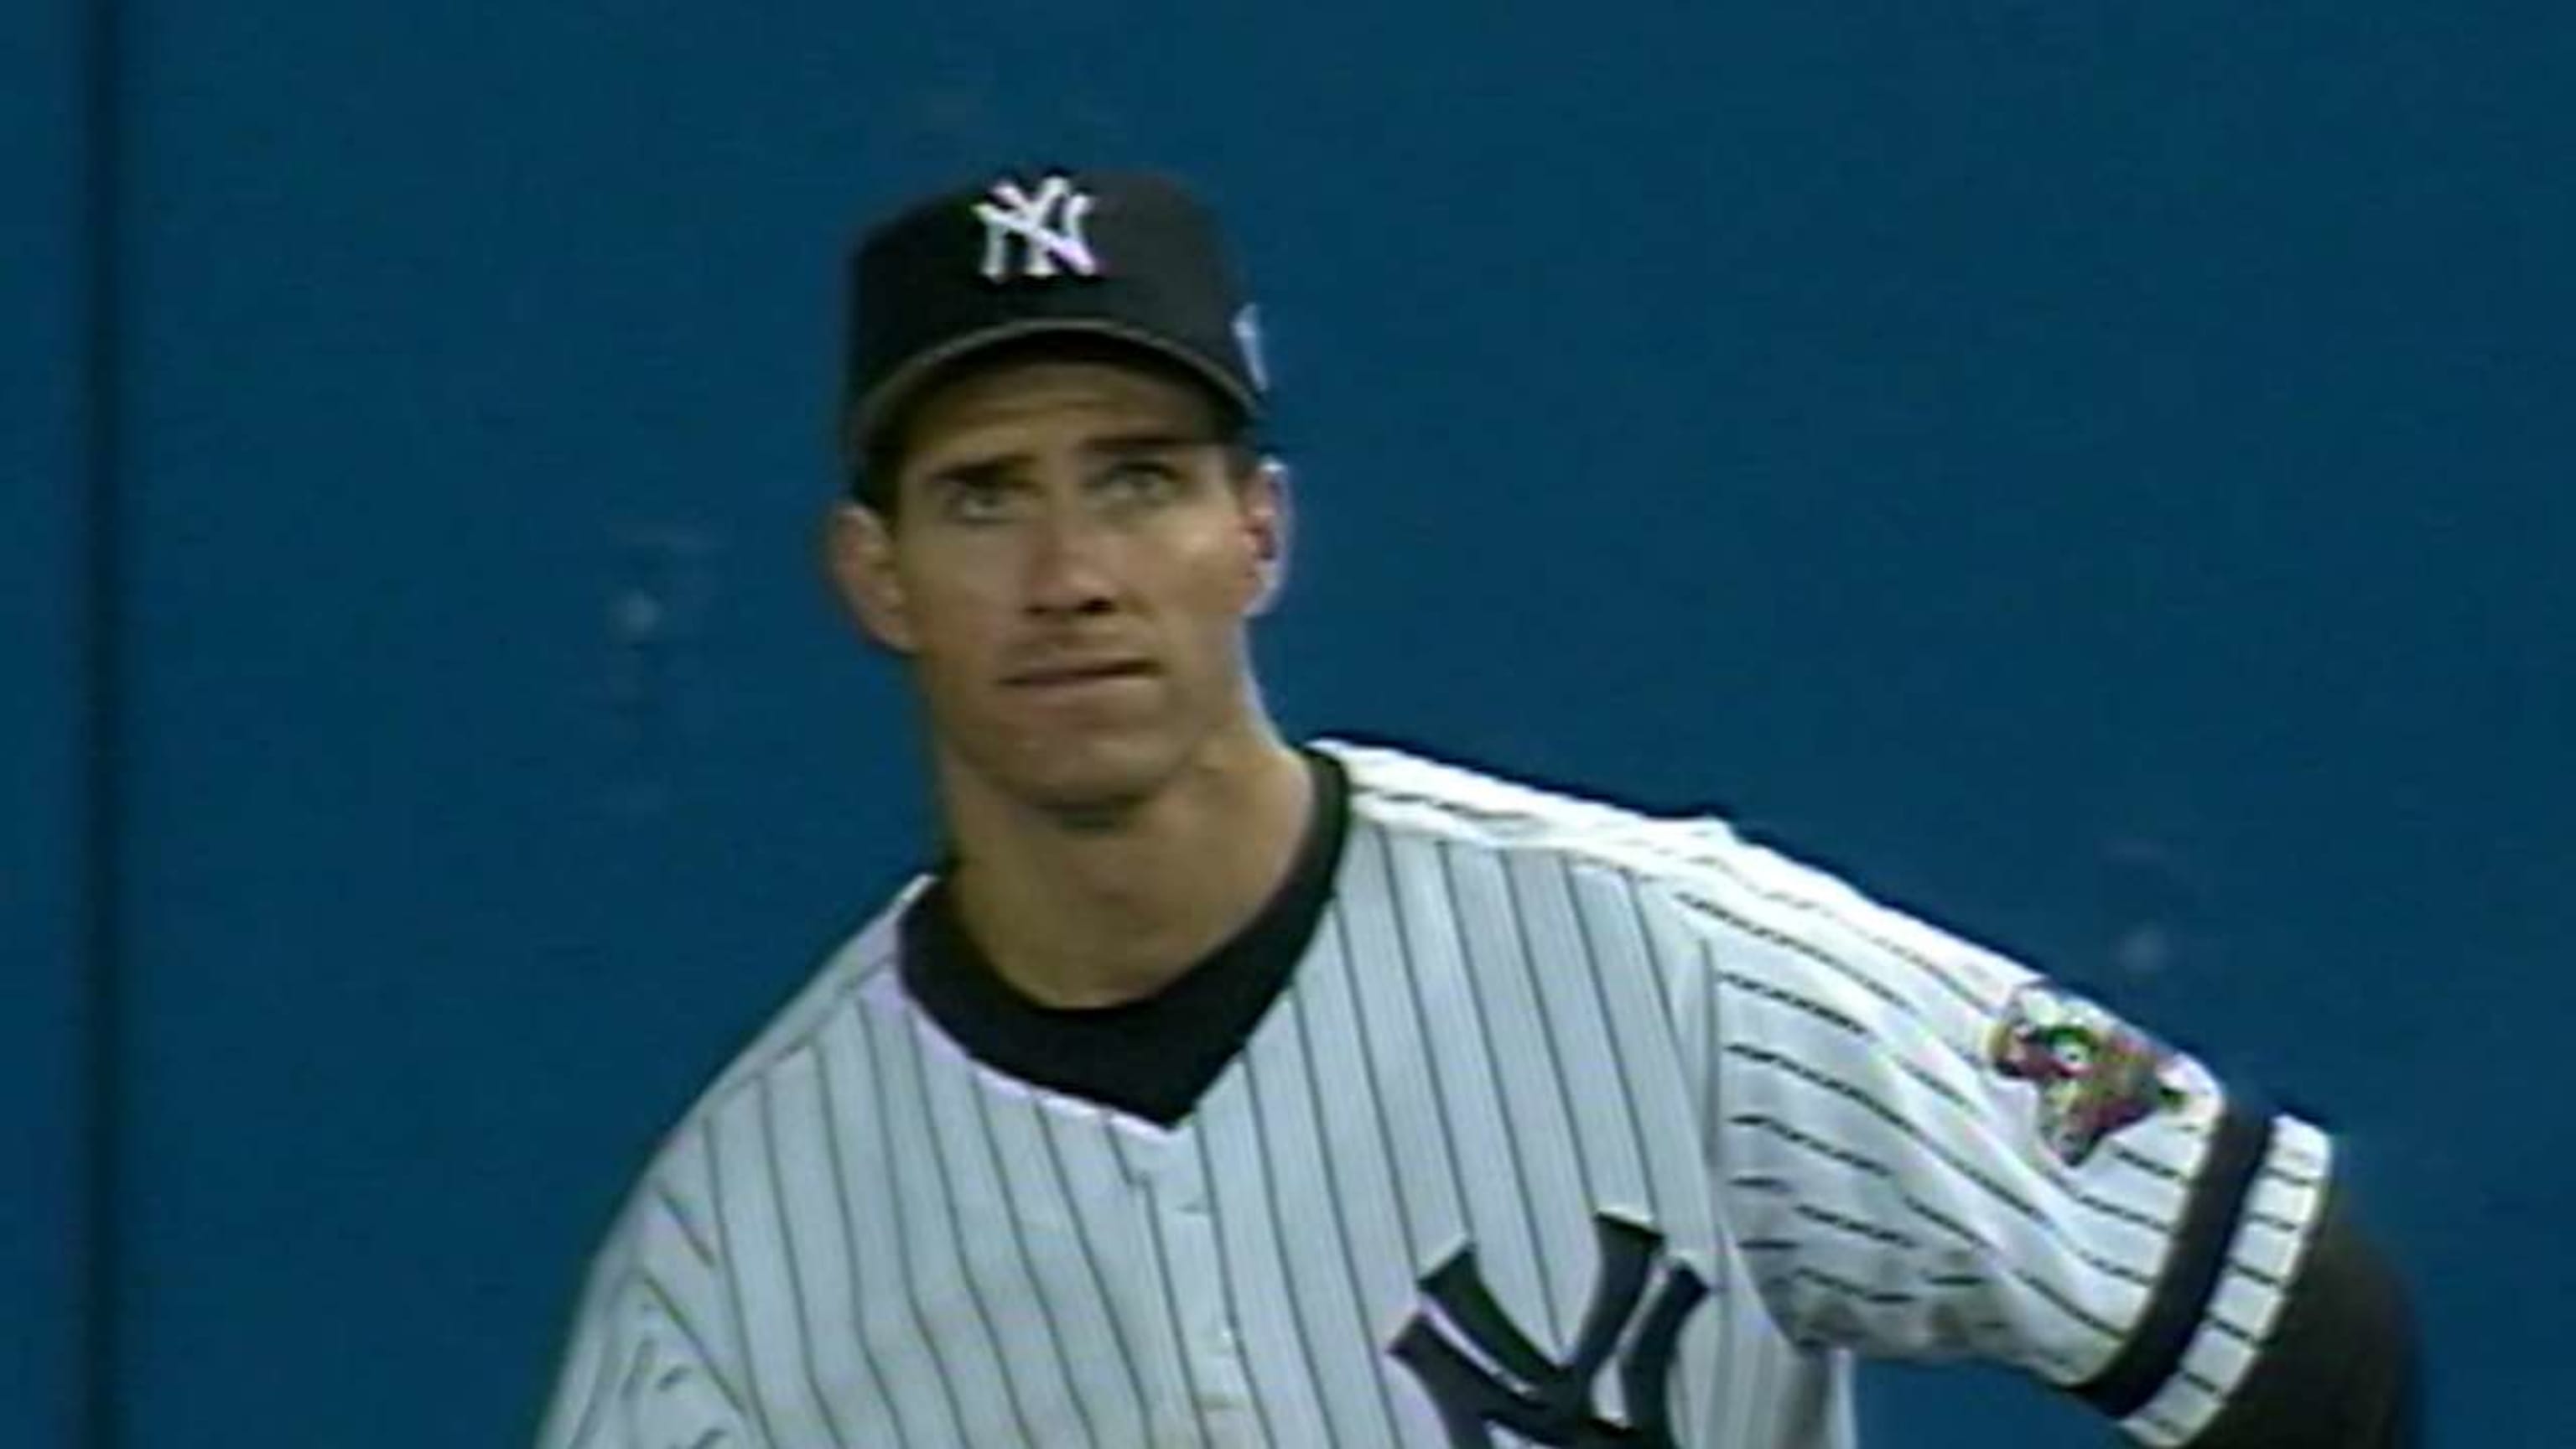 How Paul O'Neill Stacks Up Against the Other Yankees With Retired Numbers